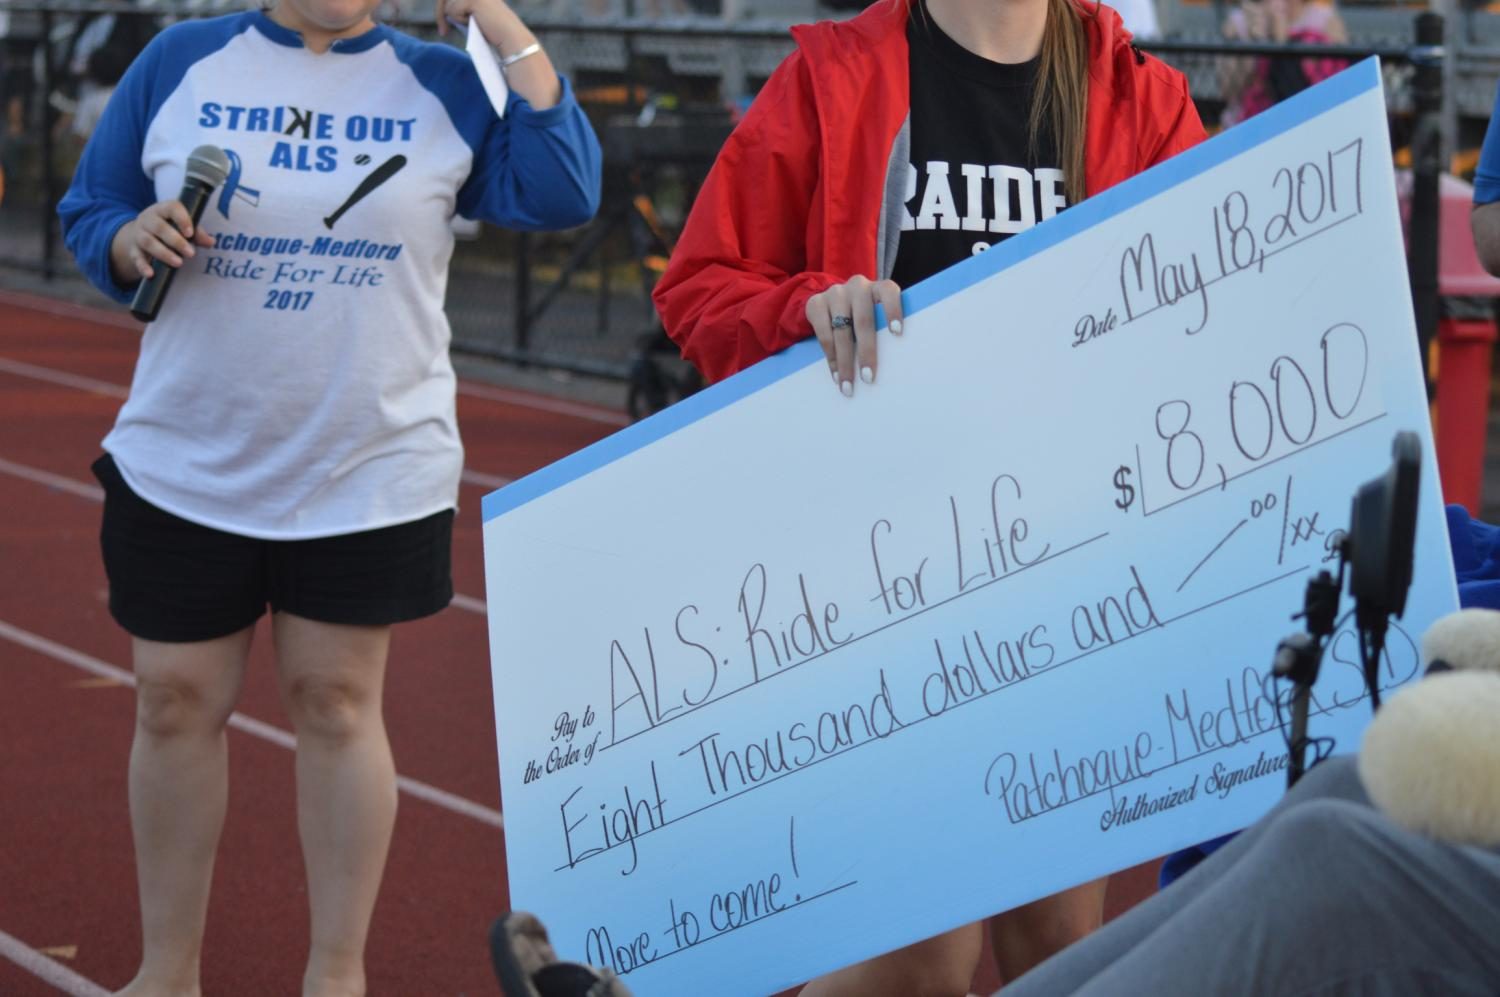 The Pat Med community raised $8,000 to support ALS research. It was announced last night that the money would go toward local testing of a new treatment recently discovered.